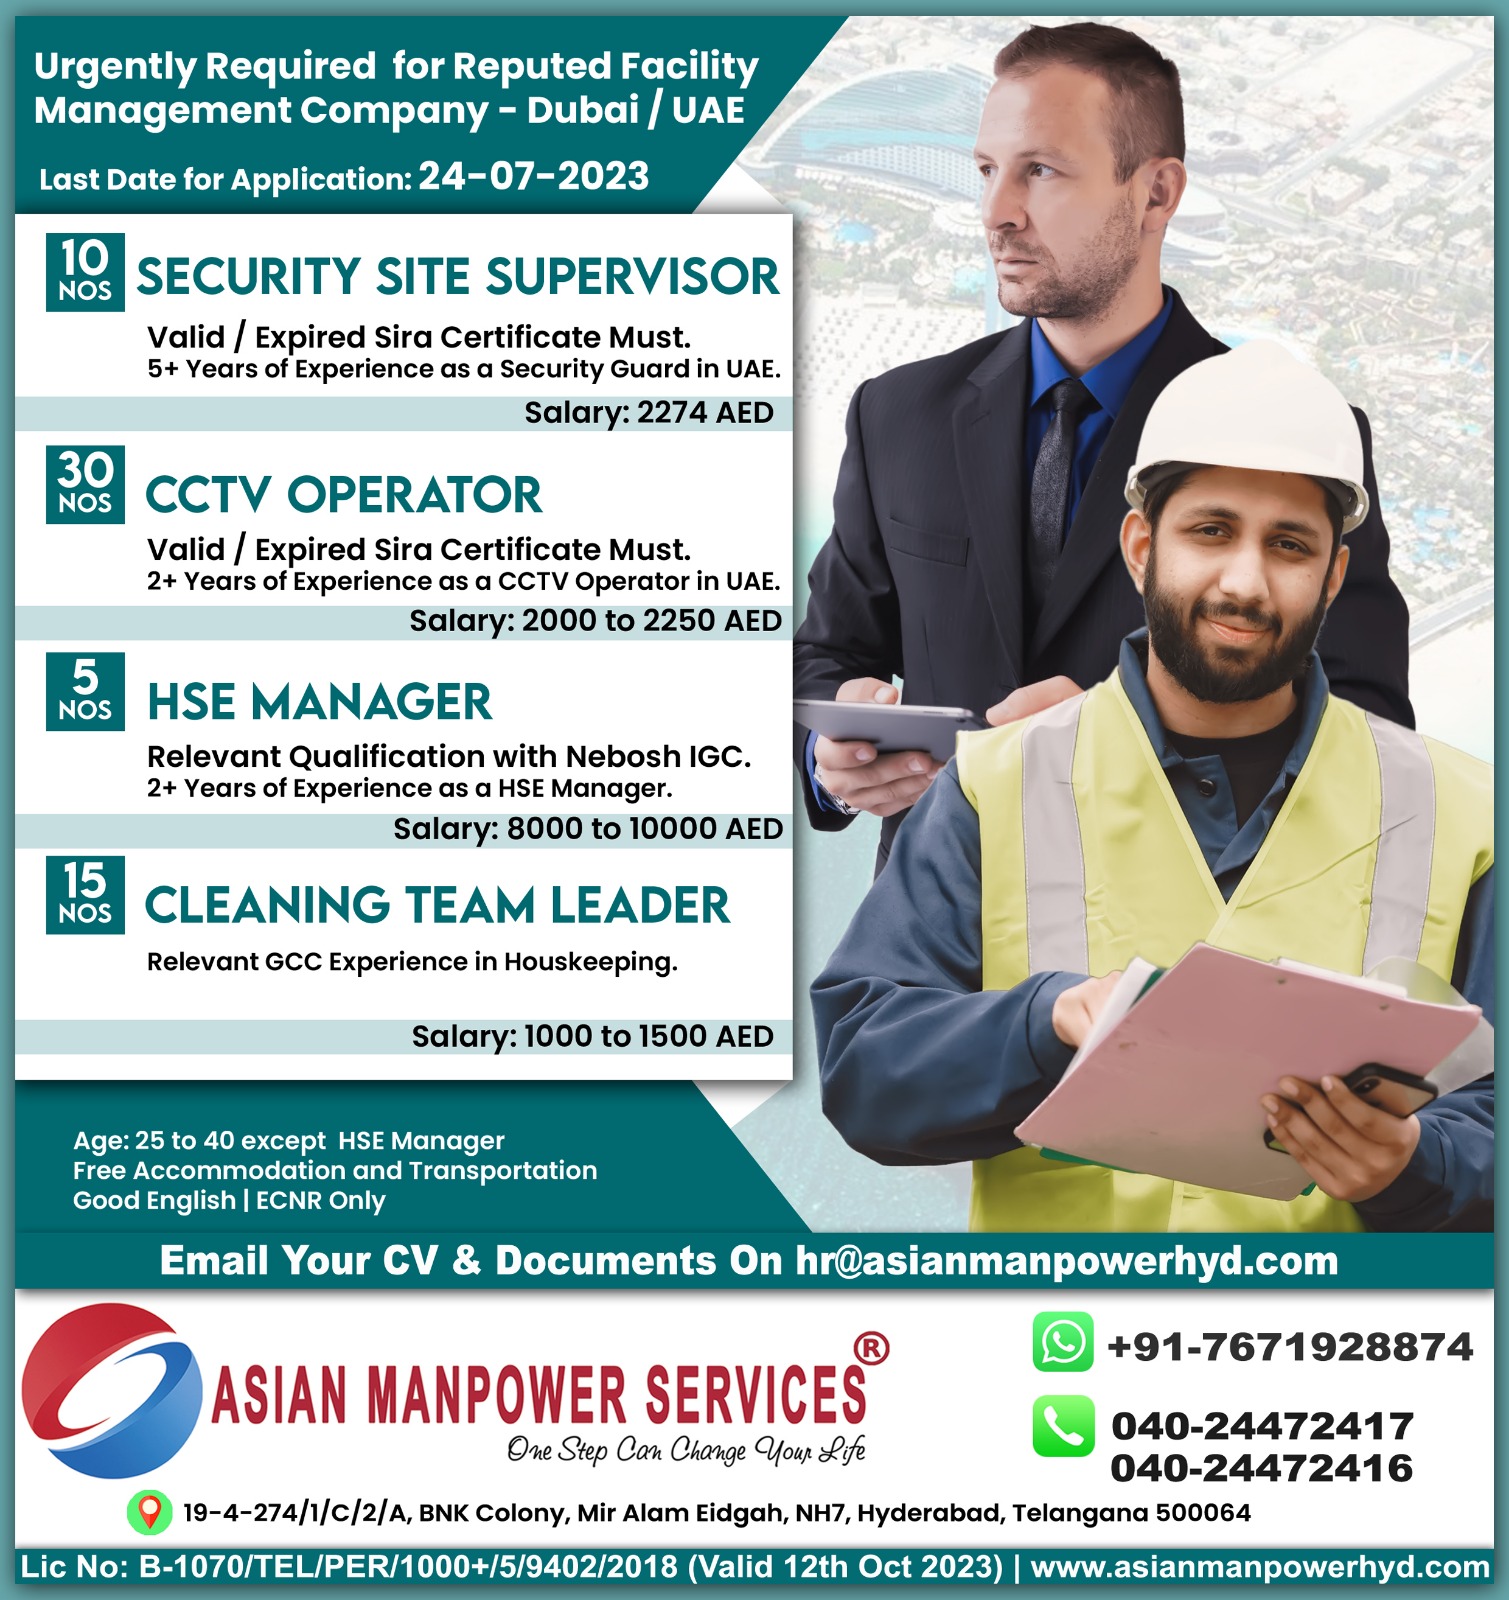 Asian Manpower services - security Site Supervisor, CCTV Operator, HSE Manager, cleaning team leader 